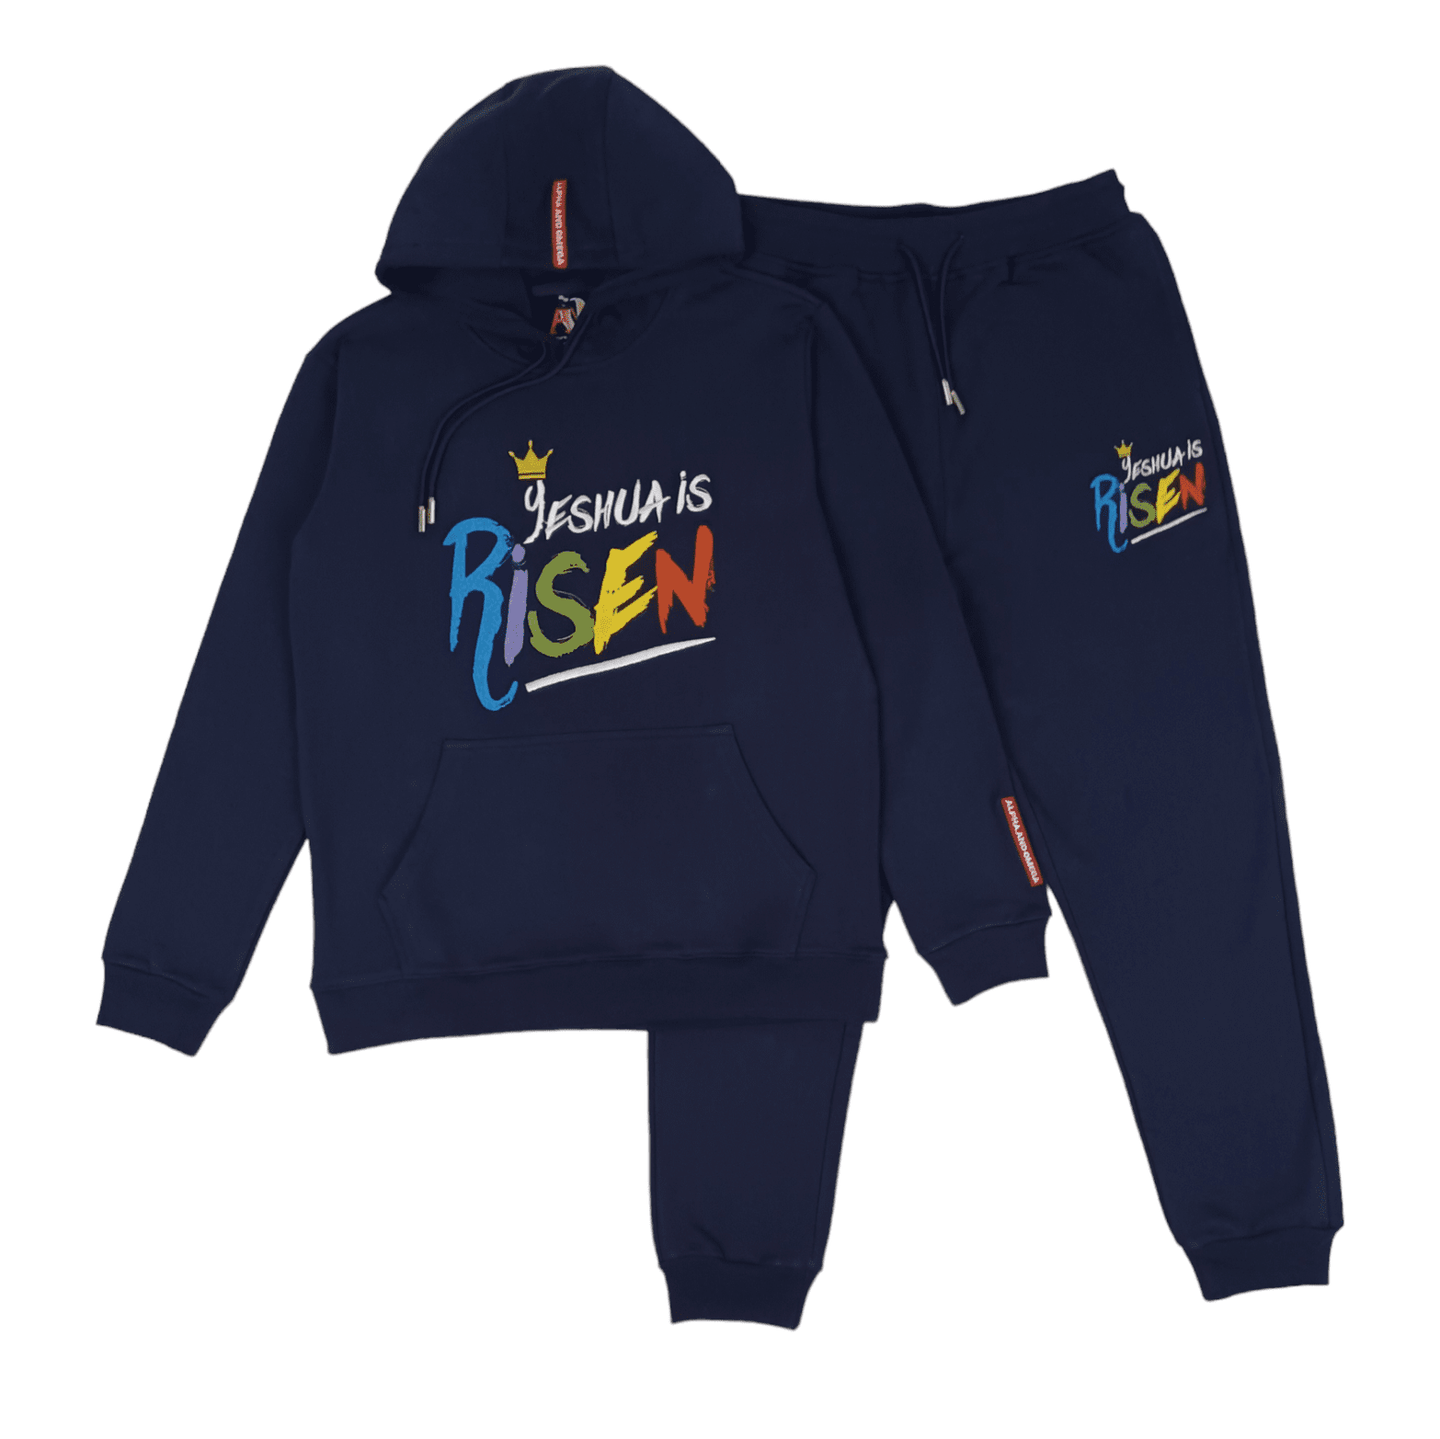 cozy christian hoodie featuring Bible verse